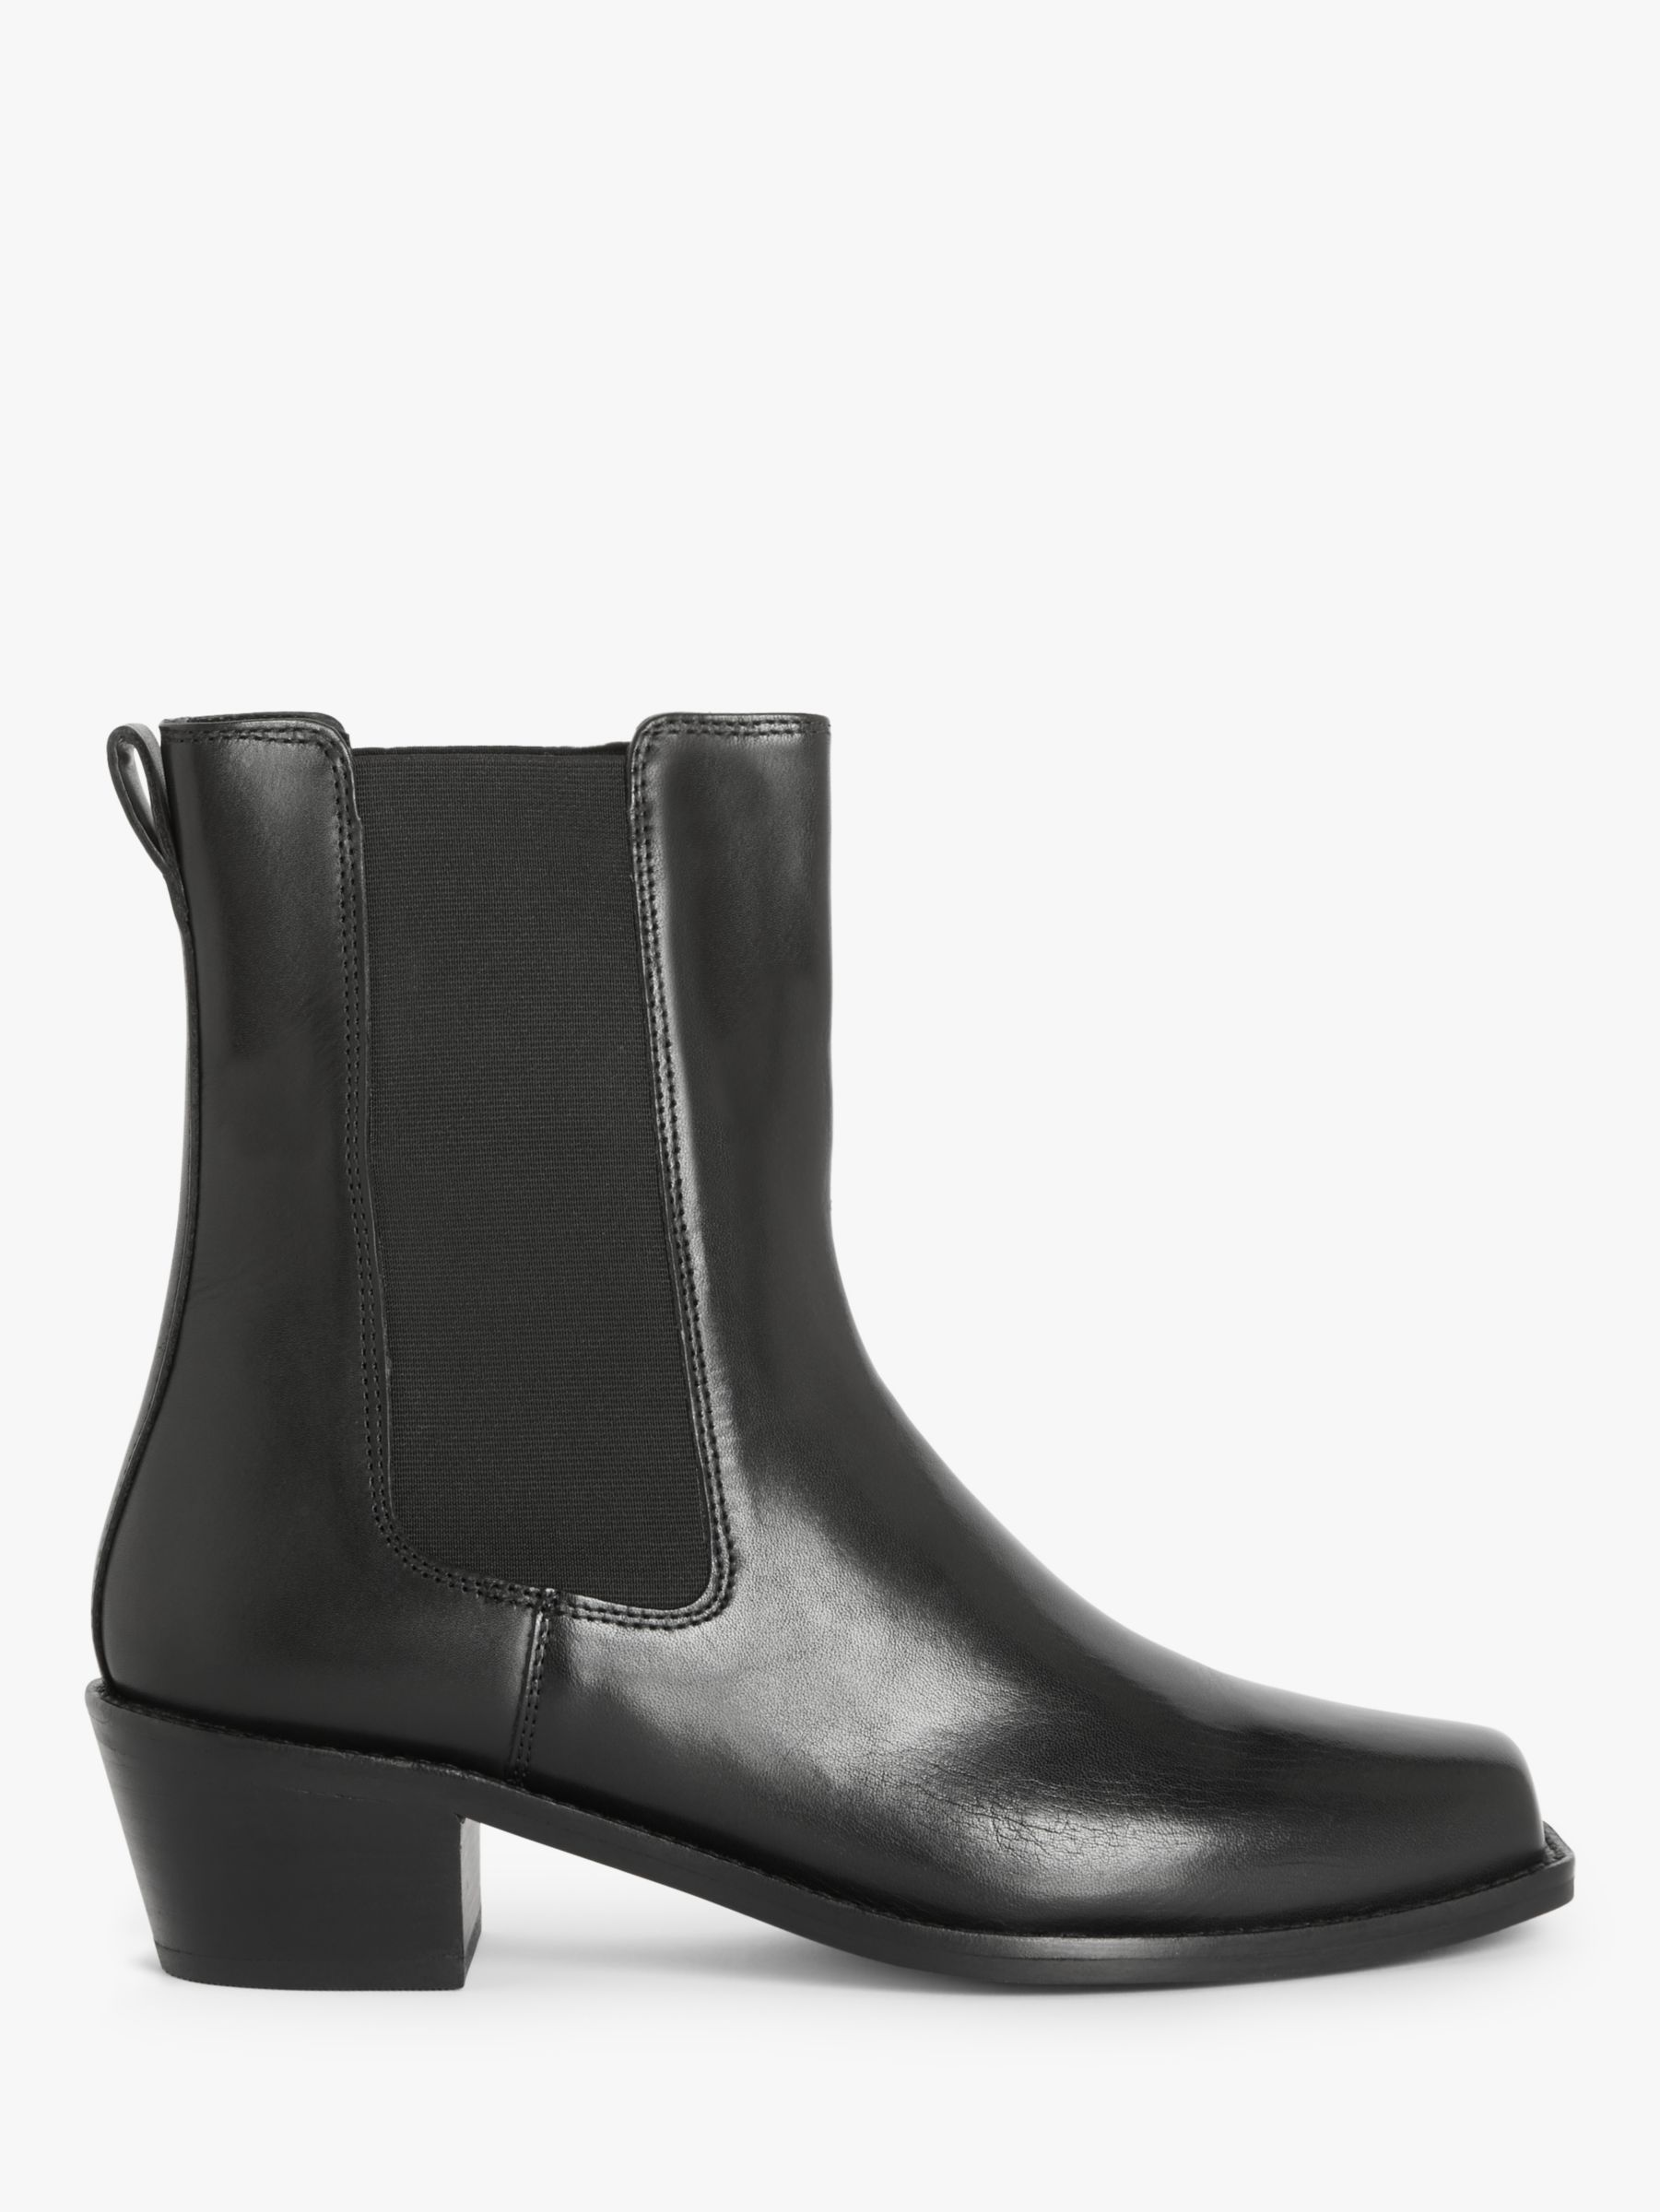 AND/OR Orson Leather Western Ankle Boots, Black